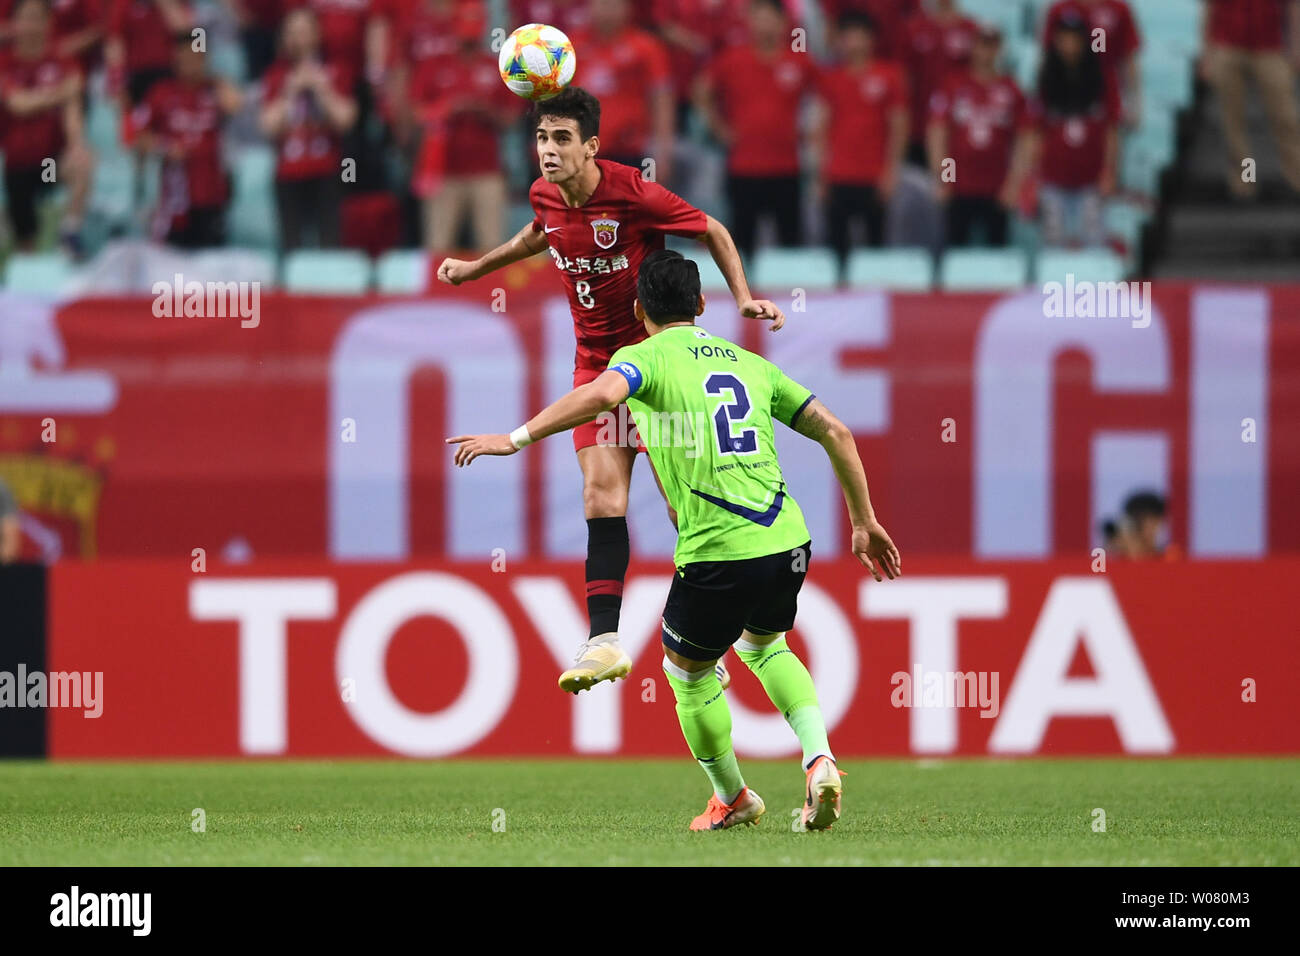 Brazilian football player Oscar dos Santos Emboaba Junior, better known as simply Oscar, of China's Shanghai SIPG F.C. heads the ball against Lee Yong of South Korea's Jeonbuk Hyundai Motors F.C. in the quarter-final match during the 2019 AFC Champions League in Jeonju, South Korea, 26 June 2019. Shanghai SIPG needed penalties to secure their place in the quarter-finals of the AFC Champions League on Wednesday, with Oscar scoring the final spot-kick to take the Chinese Super League champions past two-time winners Jeonbuk Hyundai Motors with a 5-3 penalty shootout win. Stock Photo